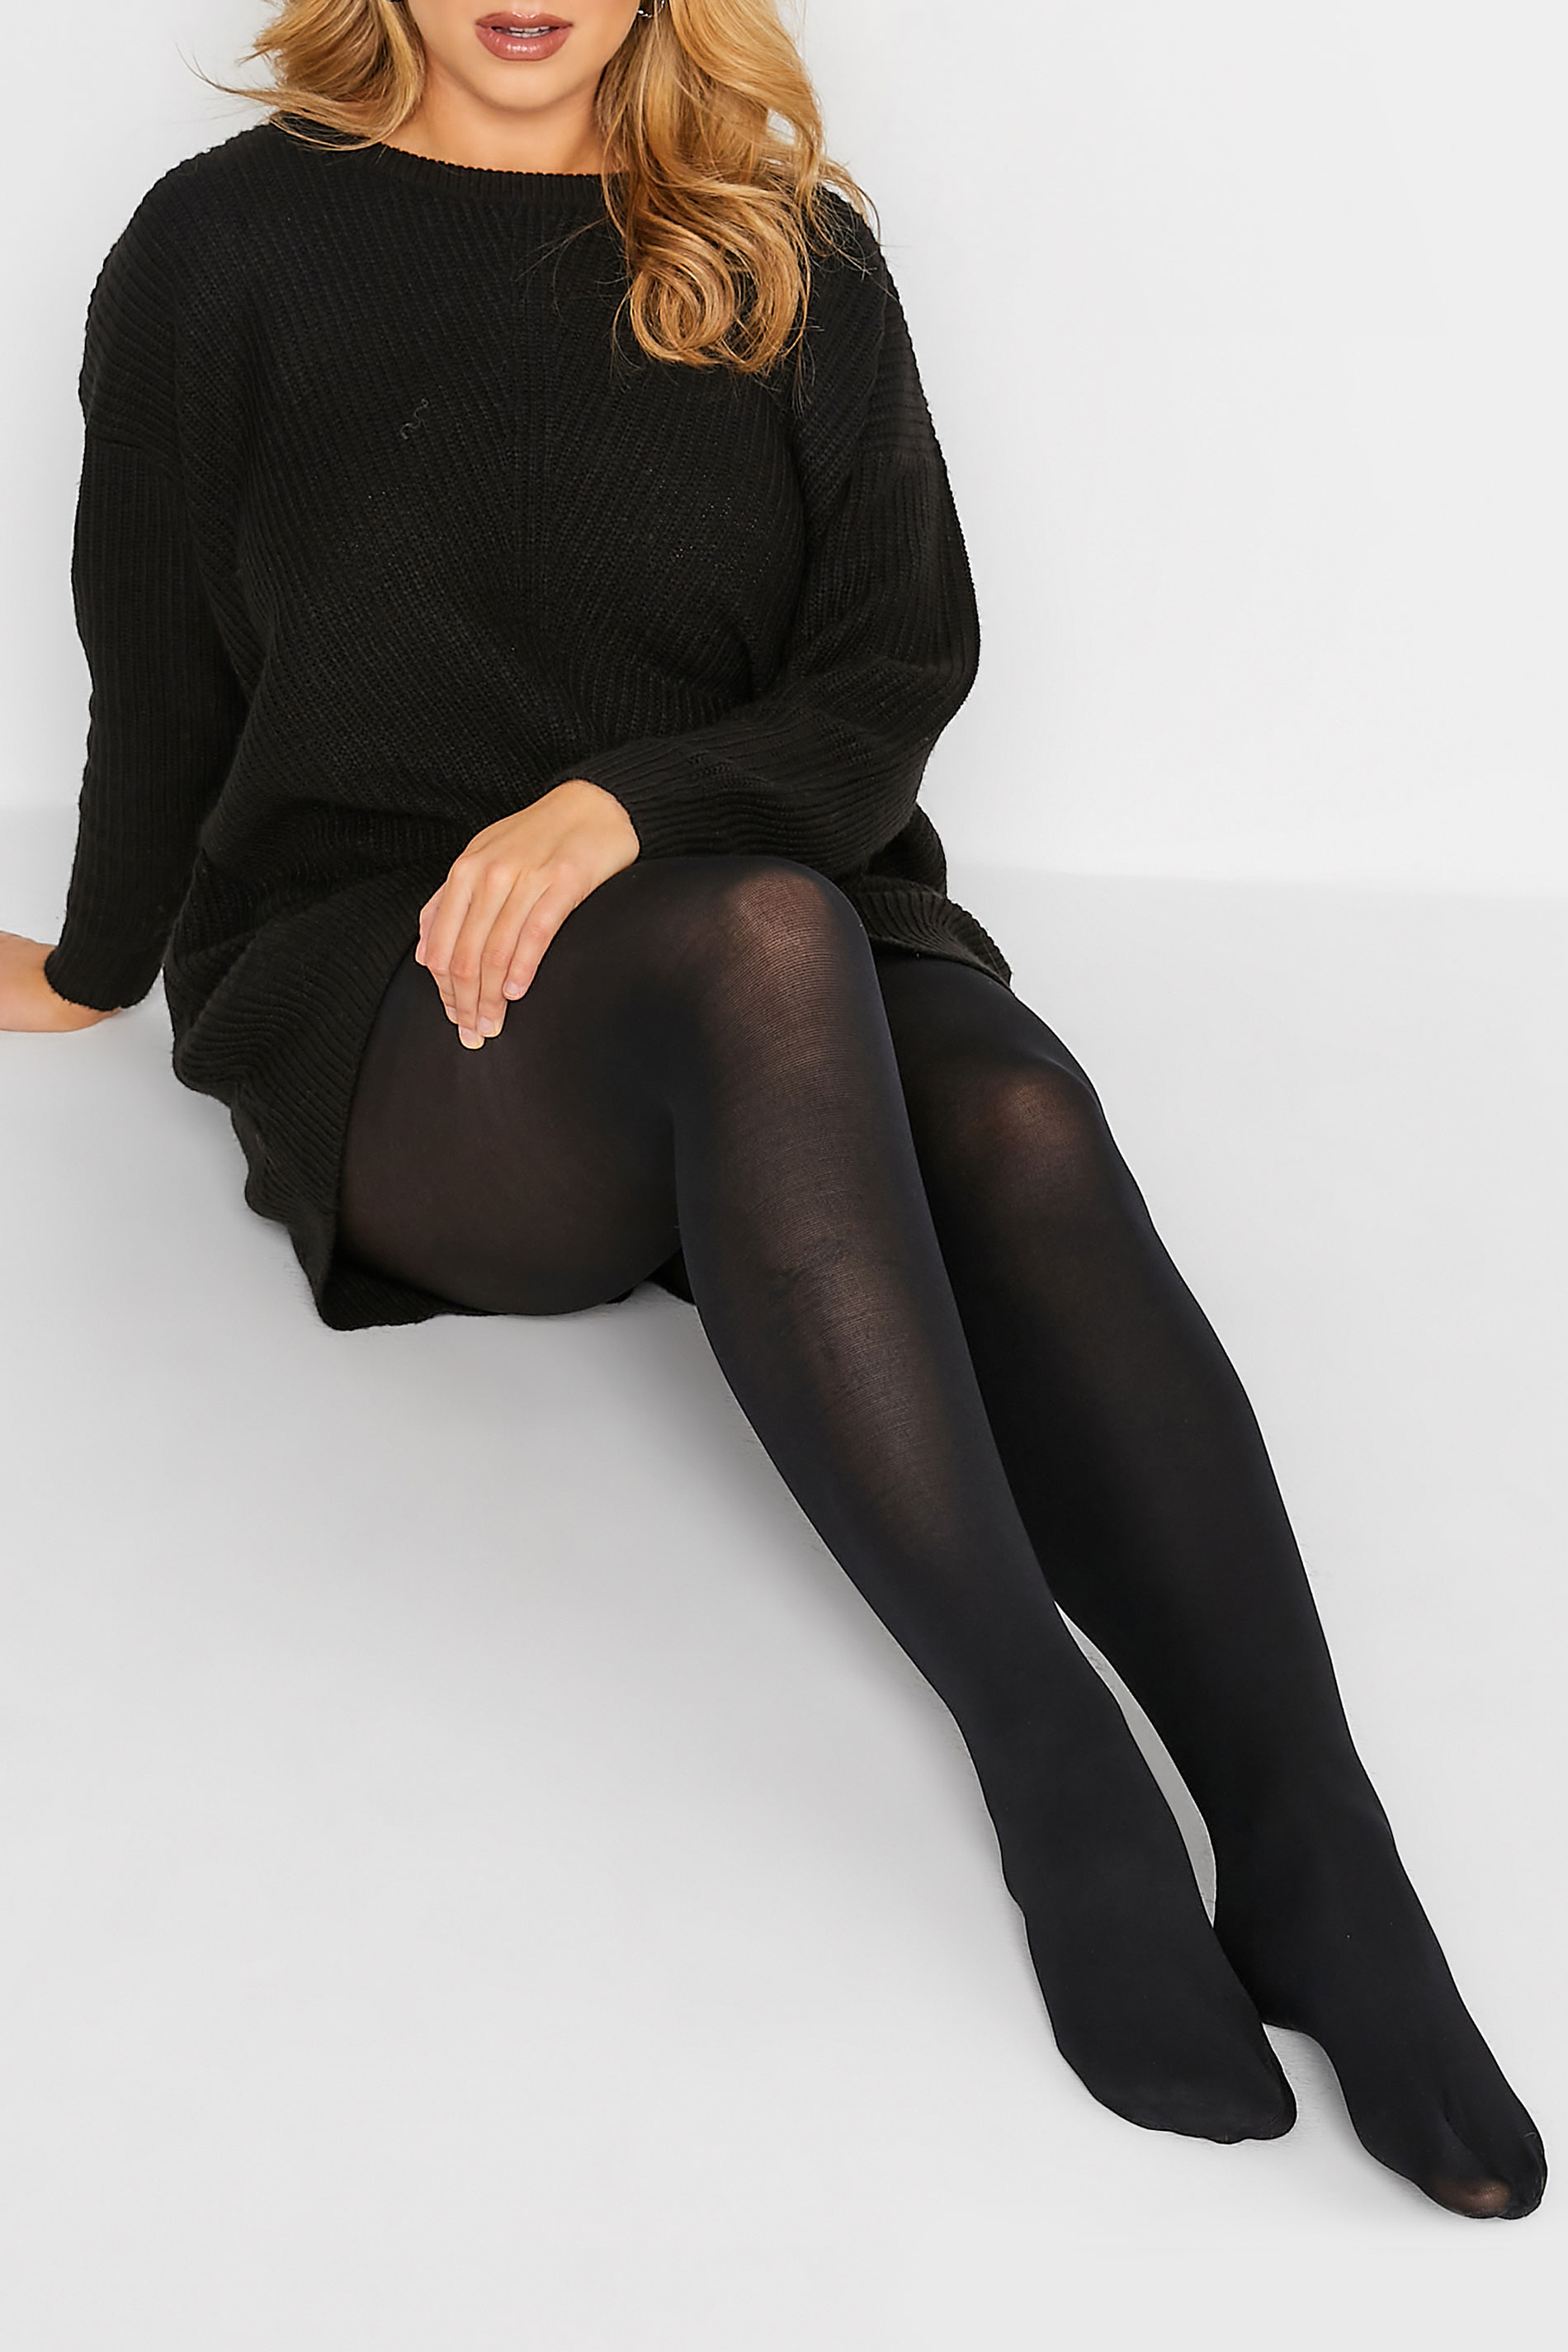 2 PACK Black 100 Denier Tights | Yours Clothing 2